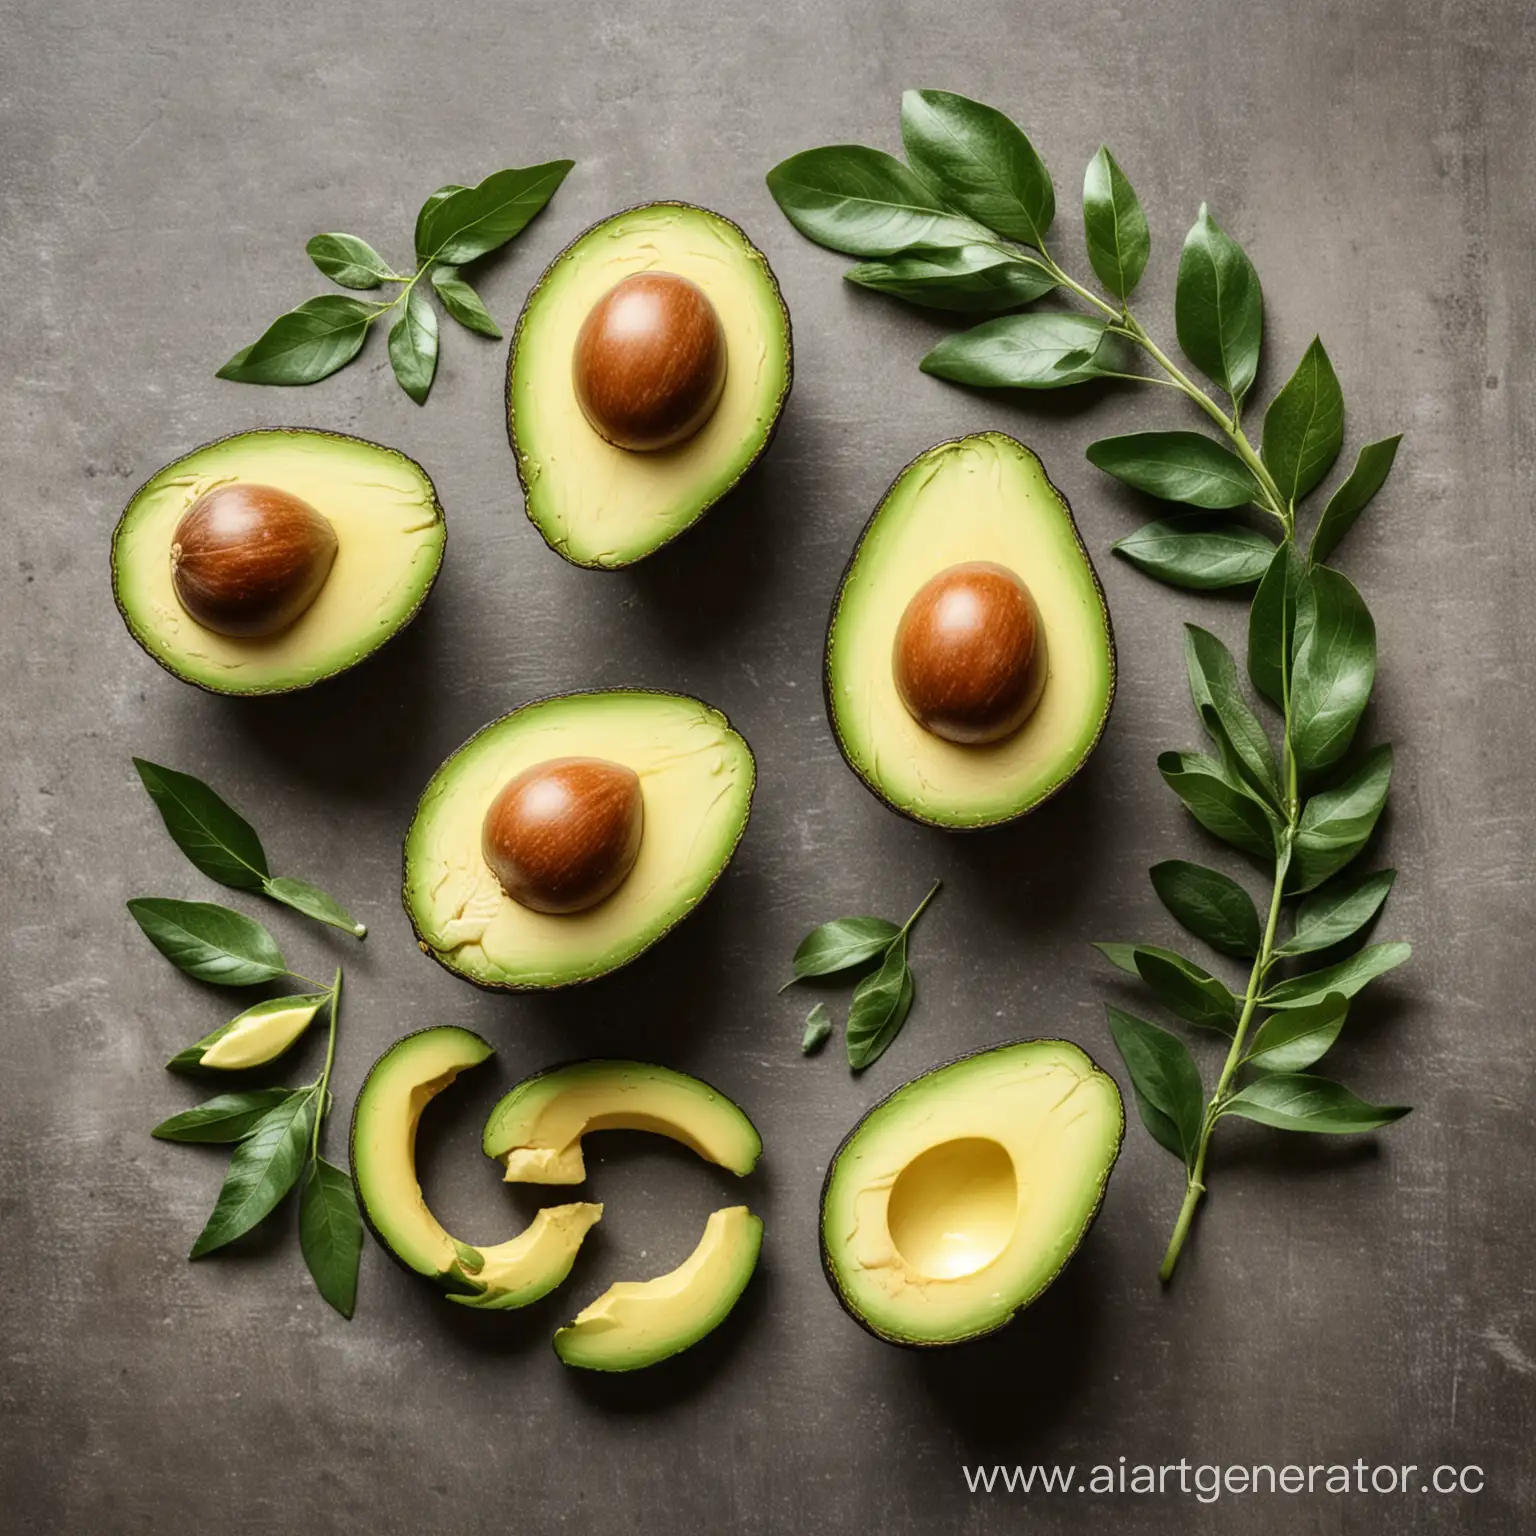 Health-Benefits-of-Avocado-NutrientRich-Superfood-Explained